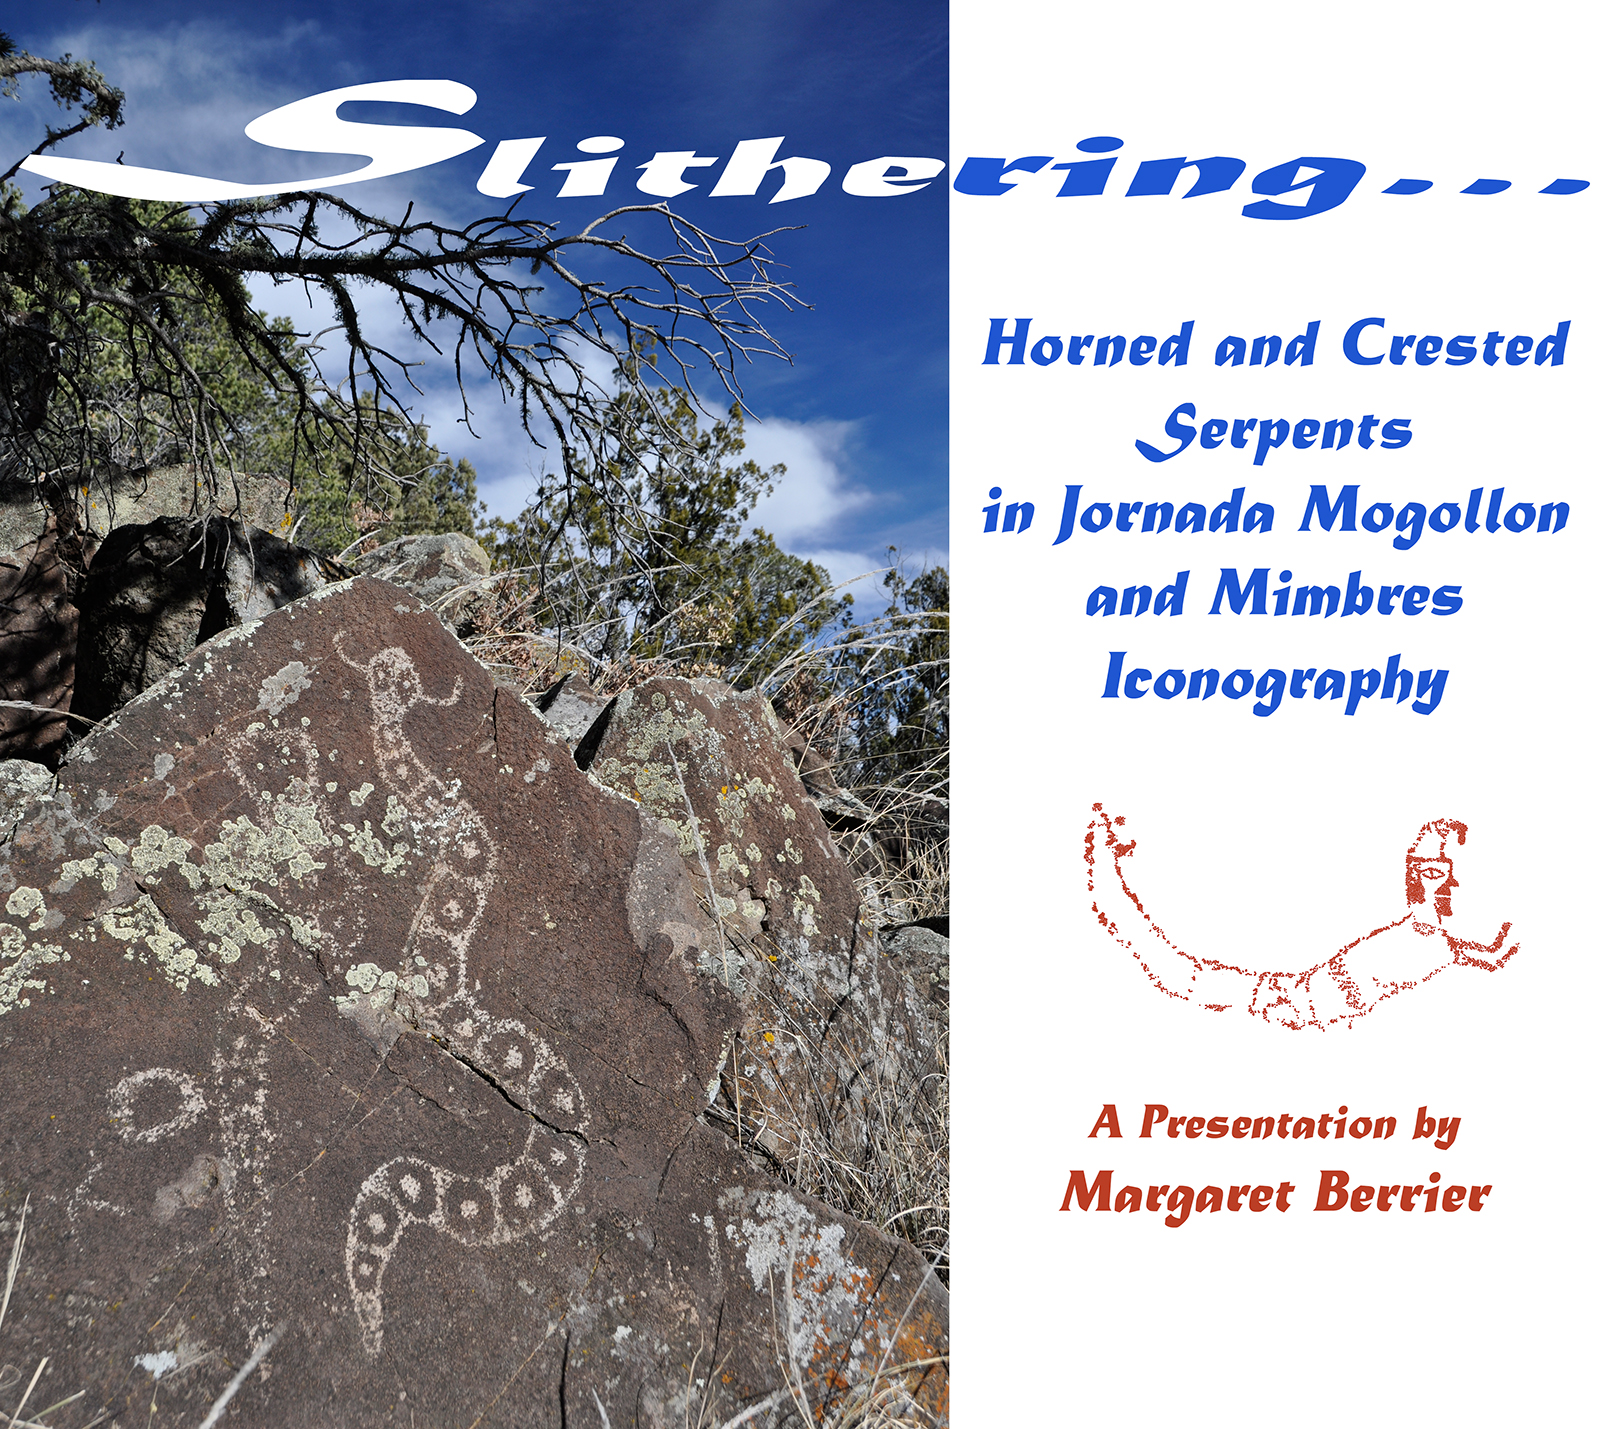 Slithering. Horned and Crested Serpents in Jornada Mogollon and Mimbres Iconography